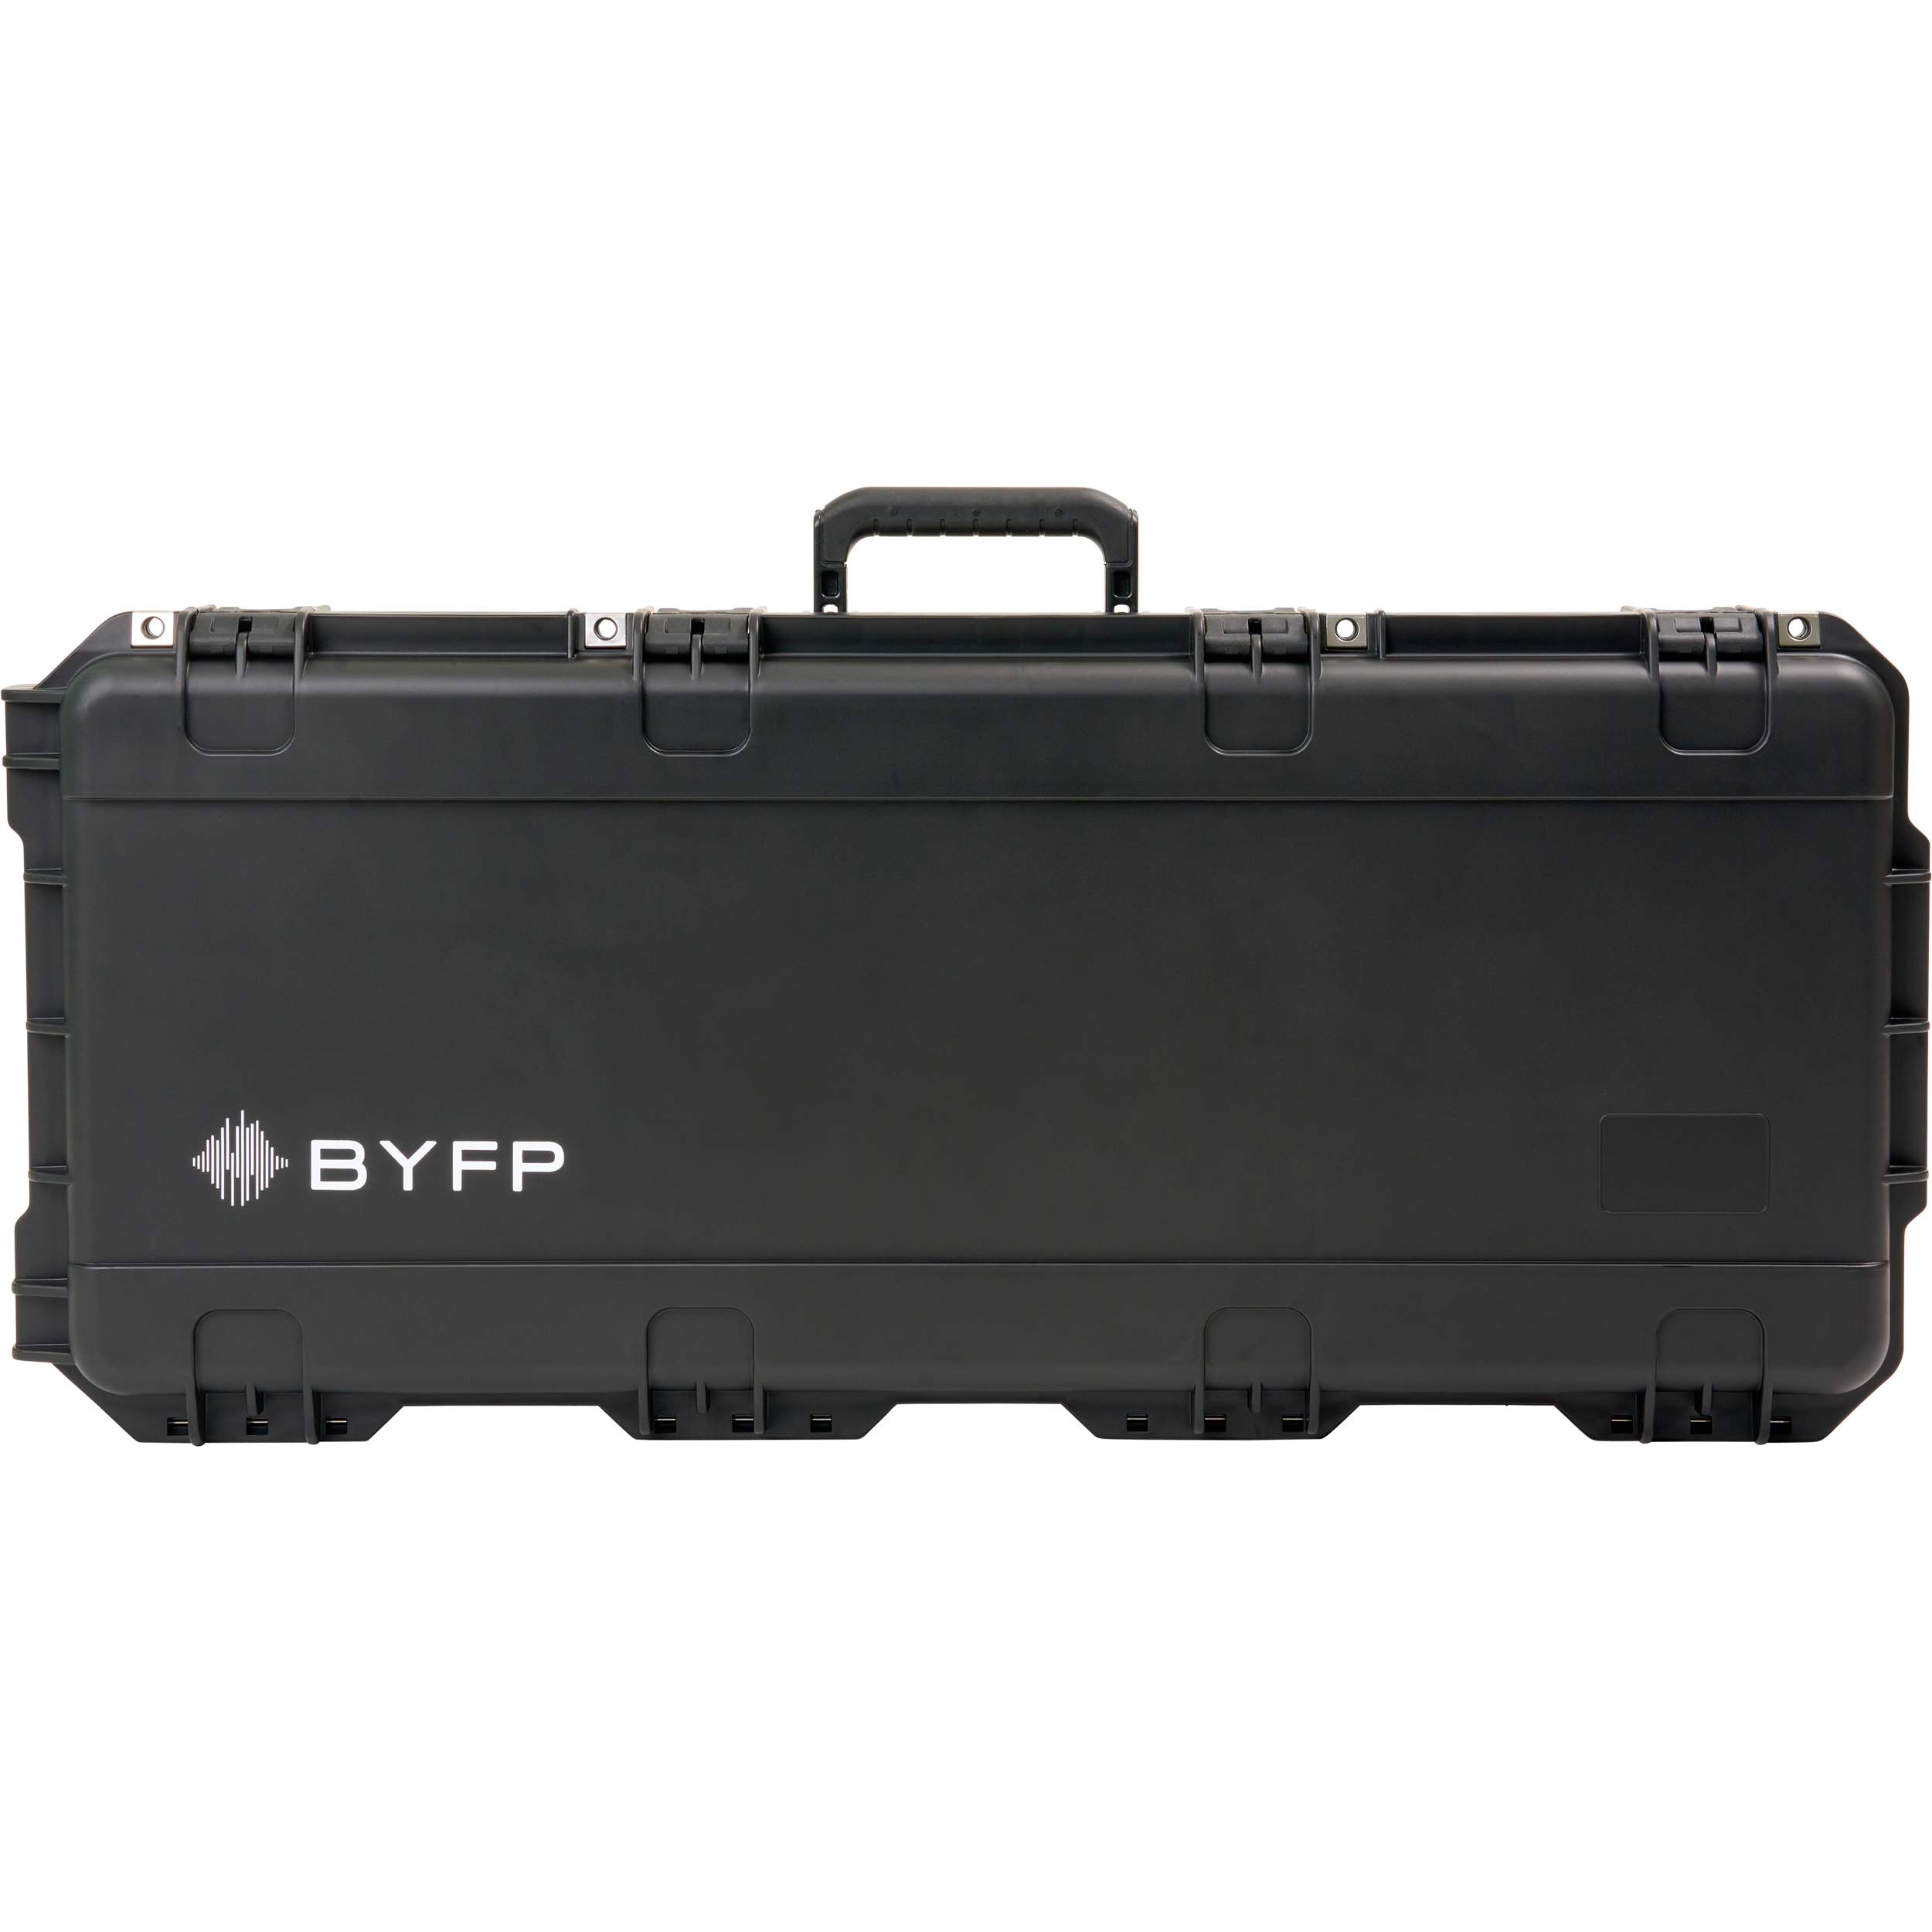 BYFP ipCase for Obsidian NX1 and NXK Controller